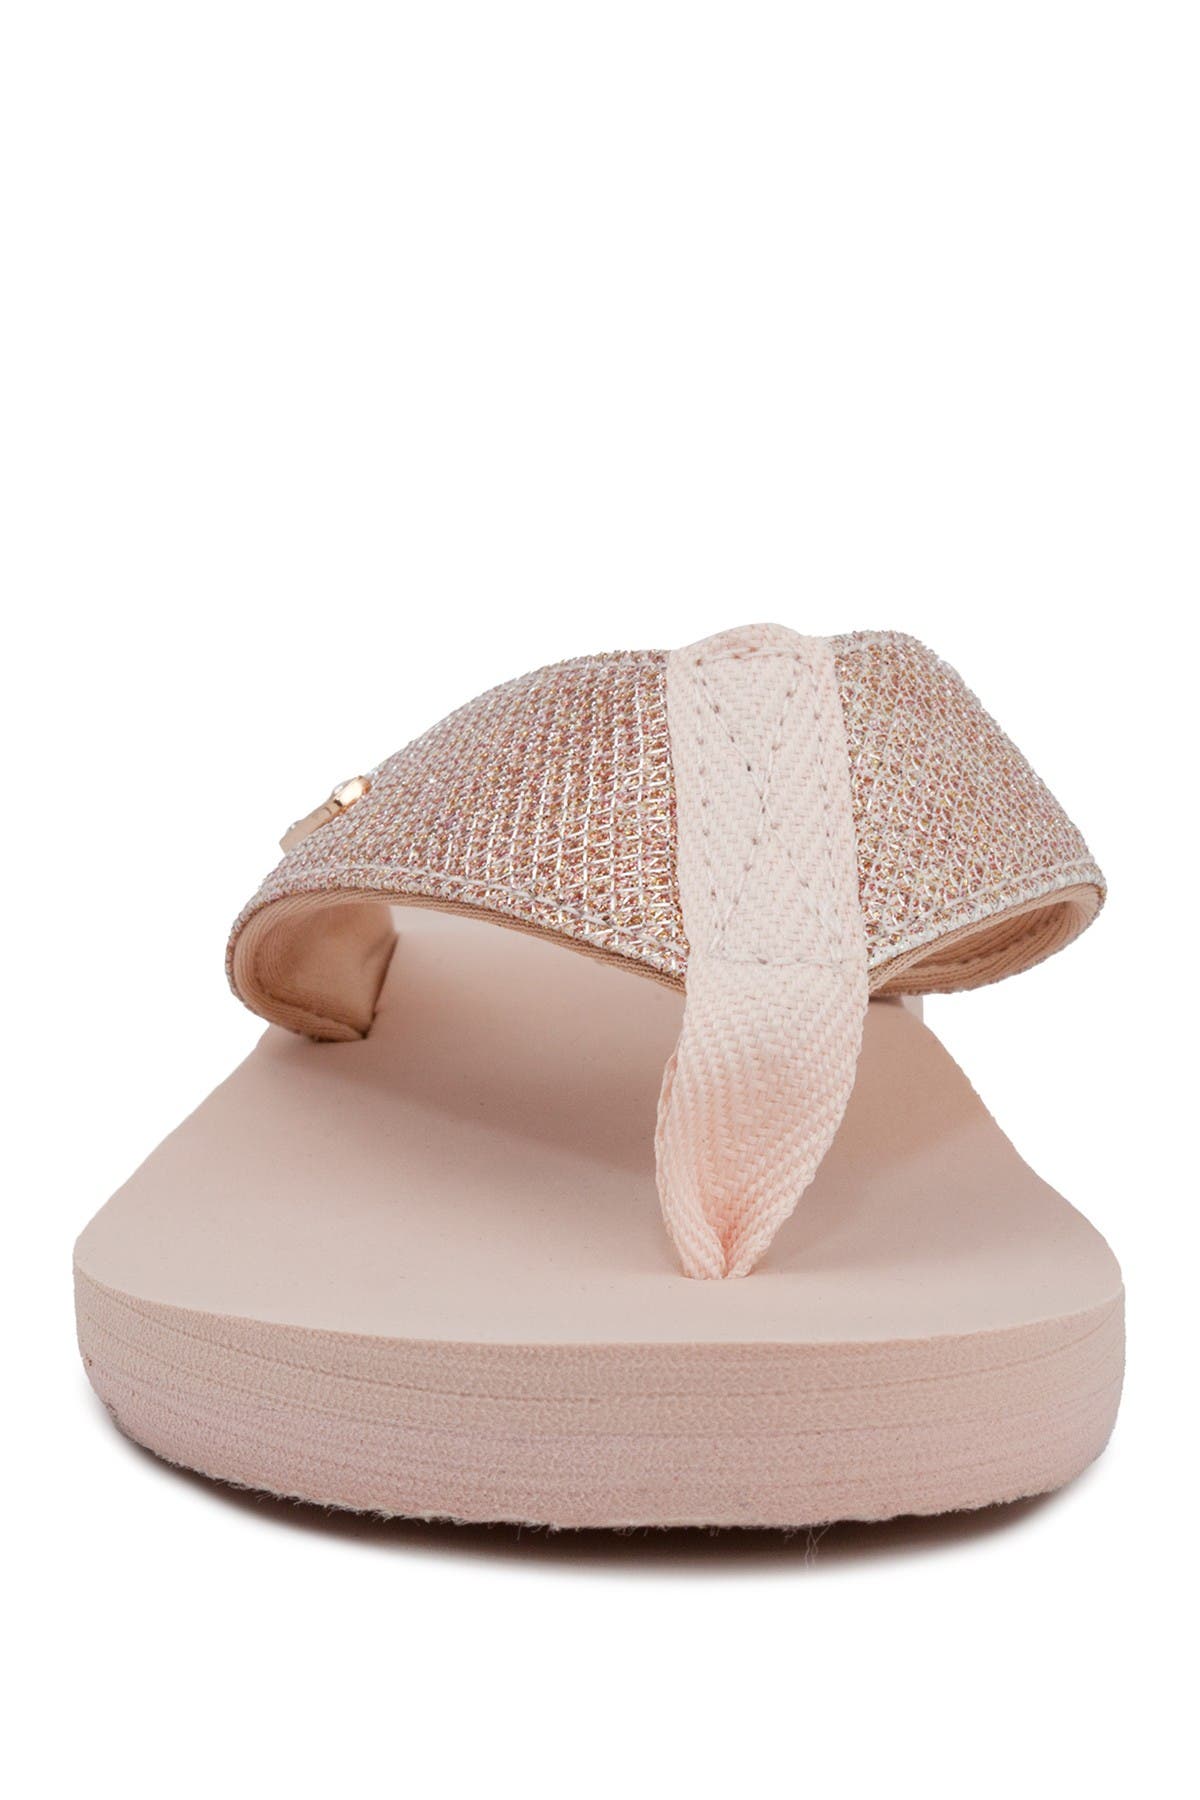 Juicy Couture Smirk Thong Sandal In Pink